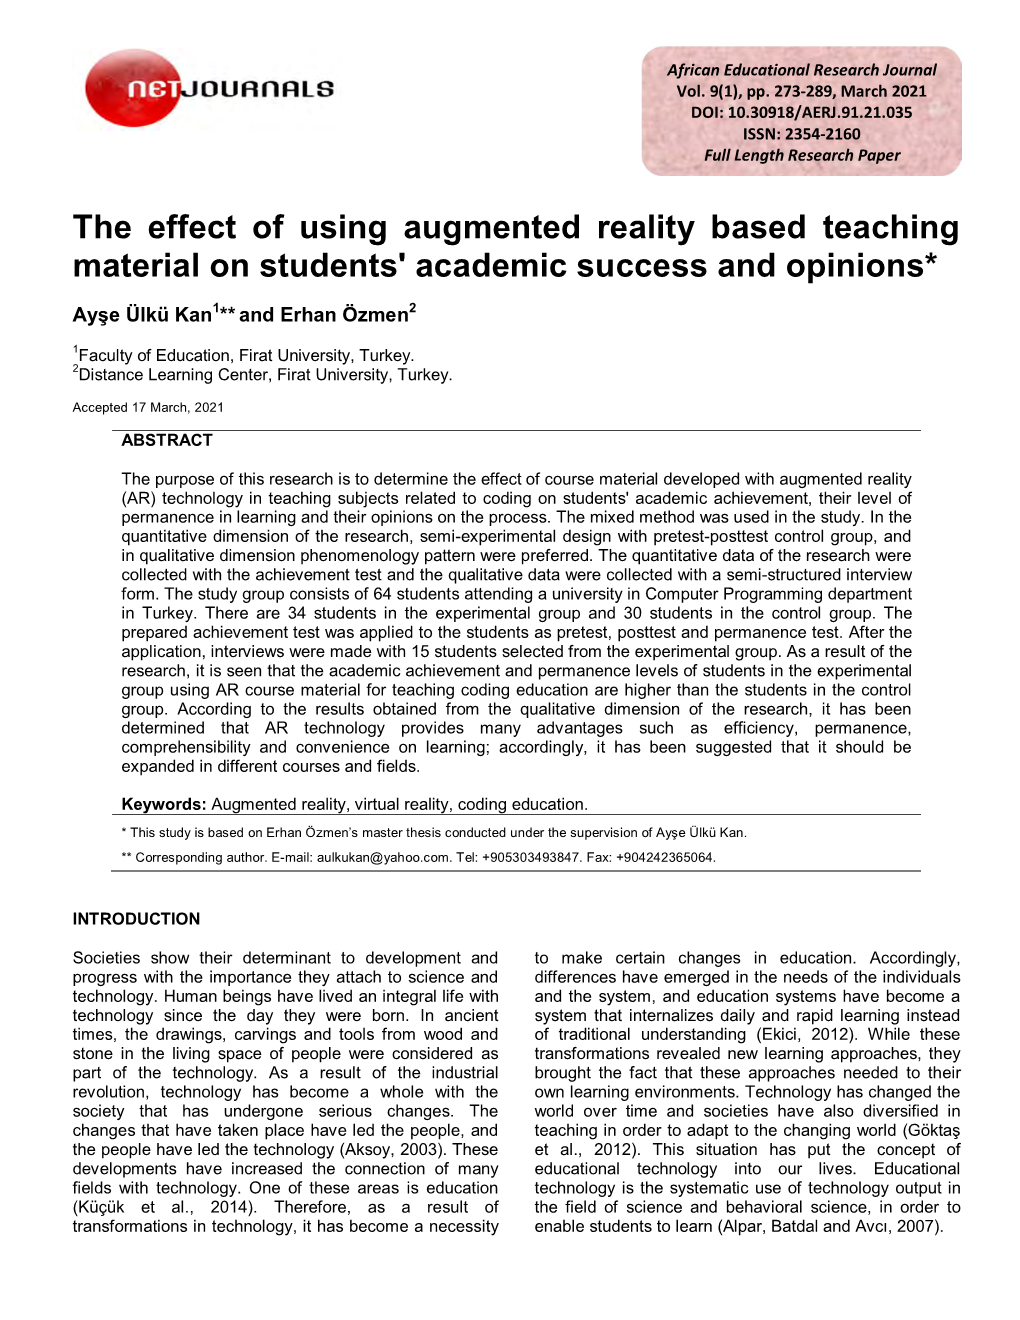 The Effect of Using Augmented Reality Based Teaching Material on Students' Academic Success and Opinions*